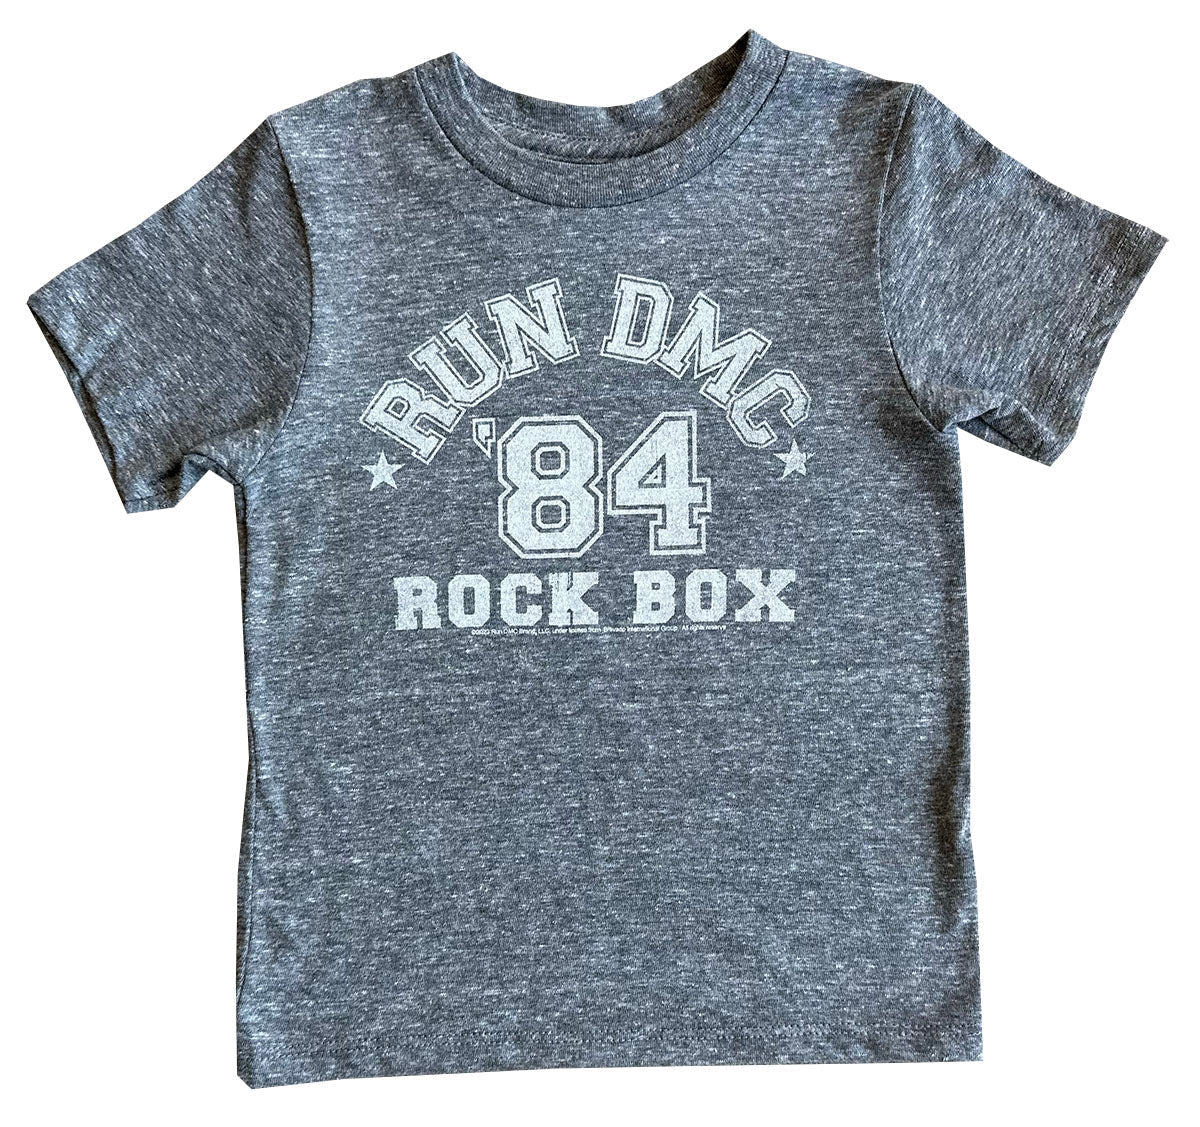  RUN-DMC Toddler Boys 3 Pack Graphic T-Shirts Tie Dye  Black/White/Gray 2T : Clothing, Shoes & Jewelry